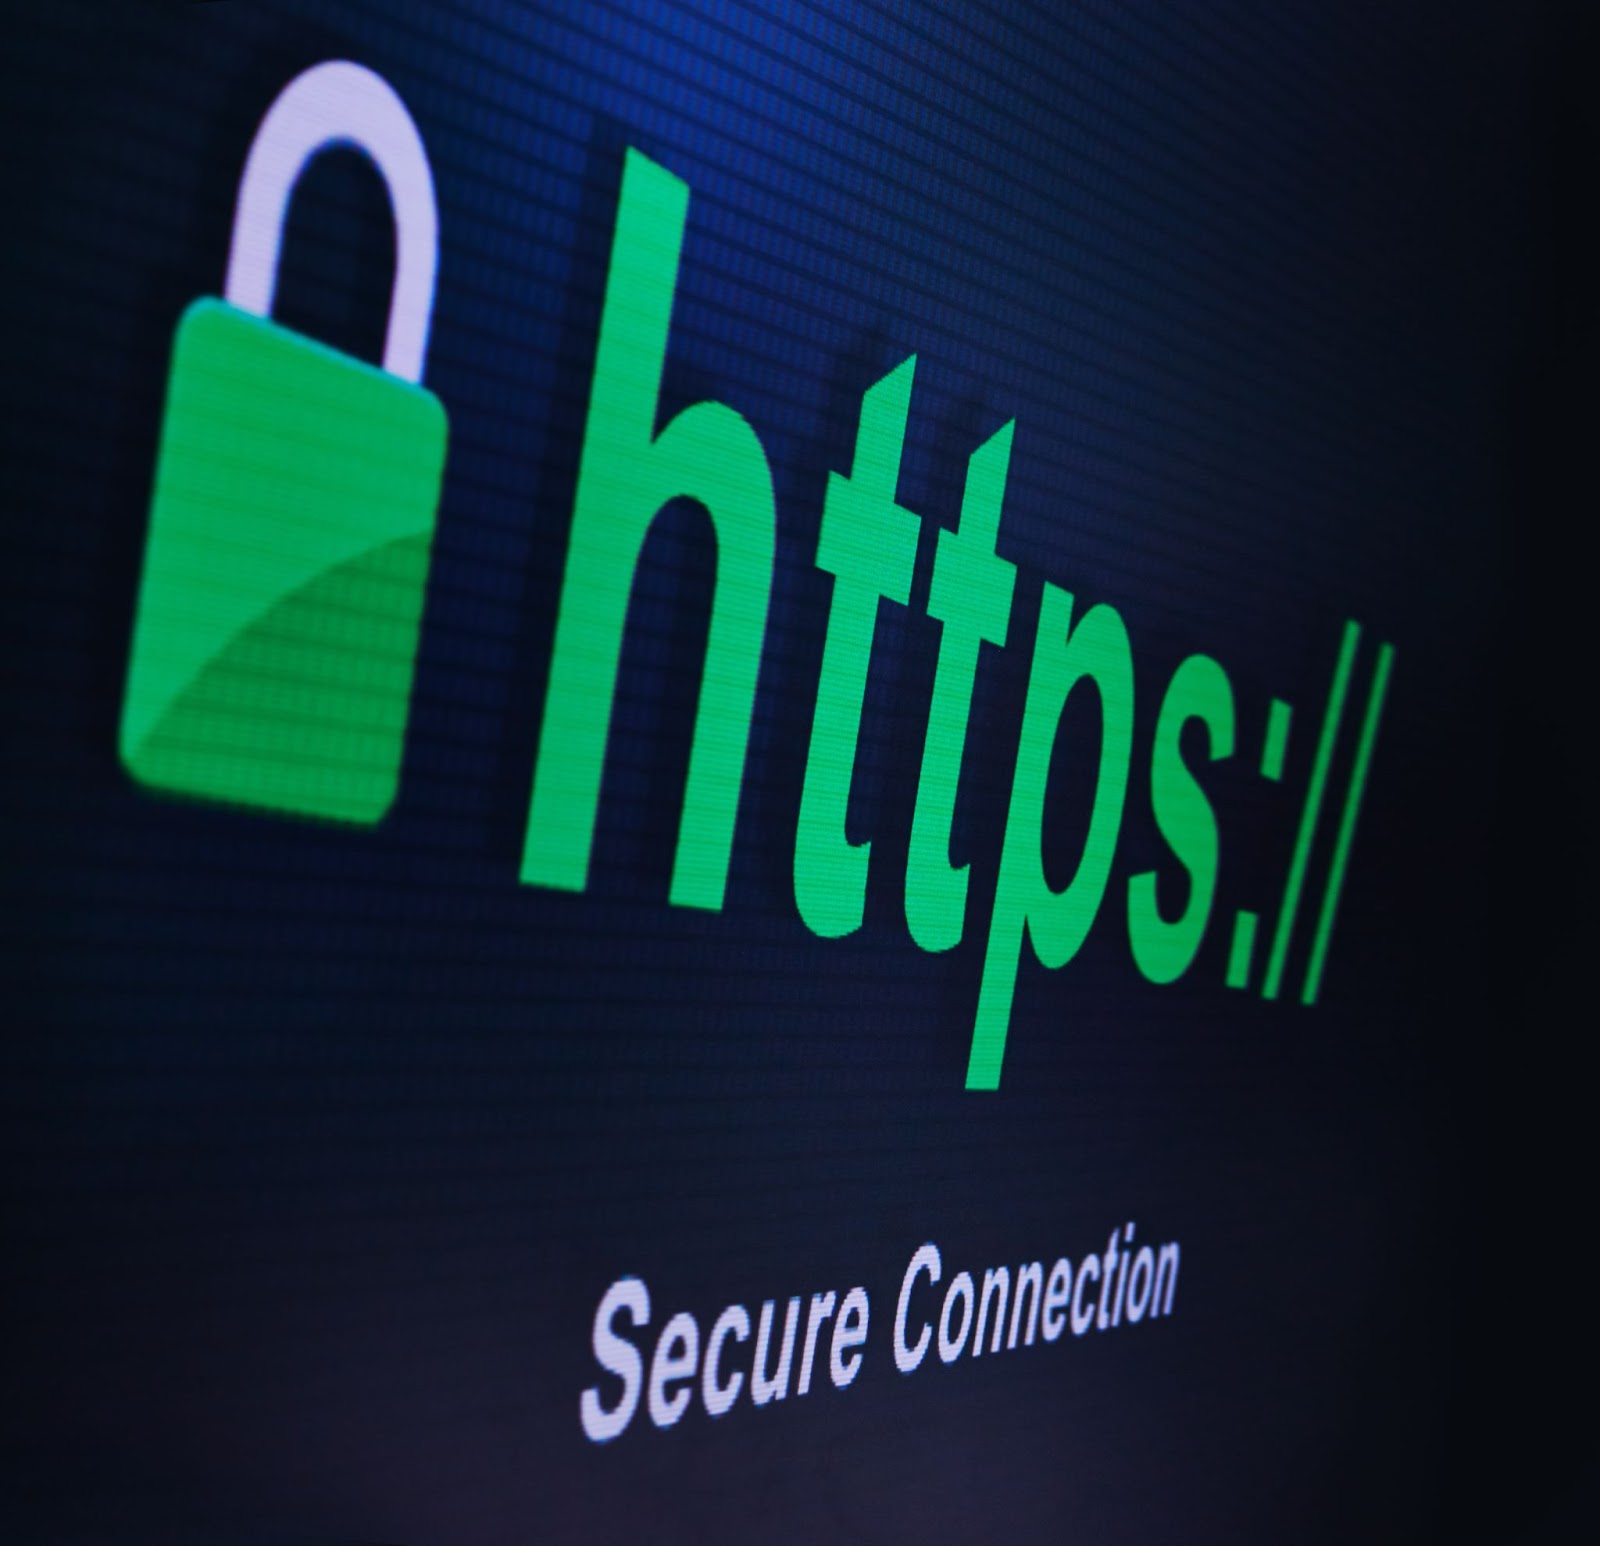 A green padlock with https:// and text that reads "Secure Connection" underneath it